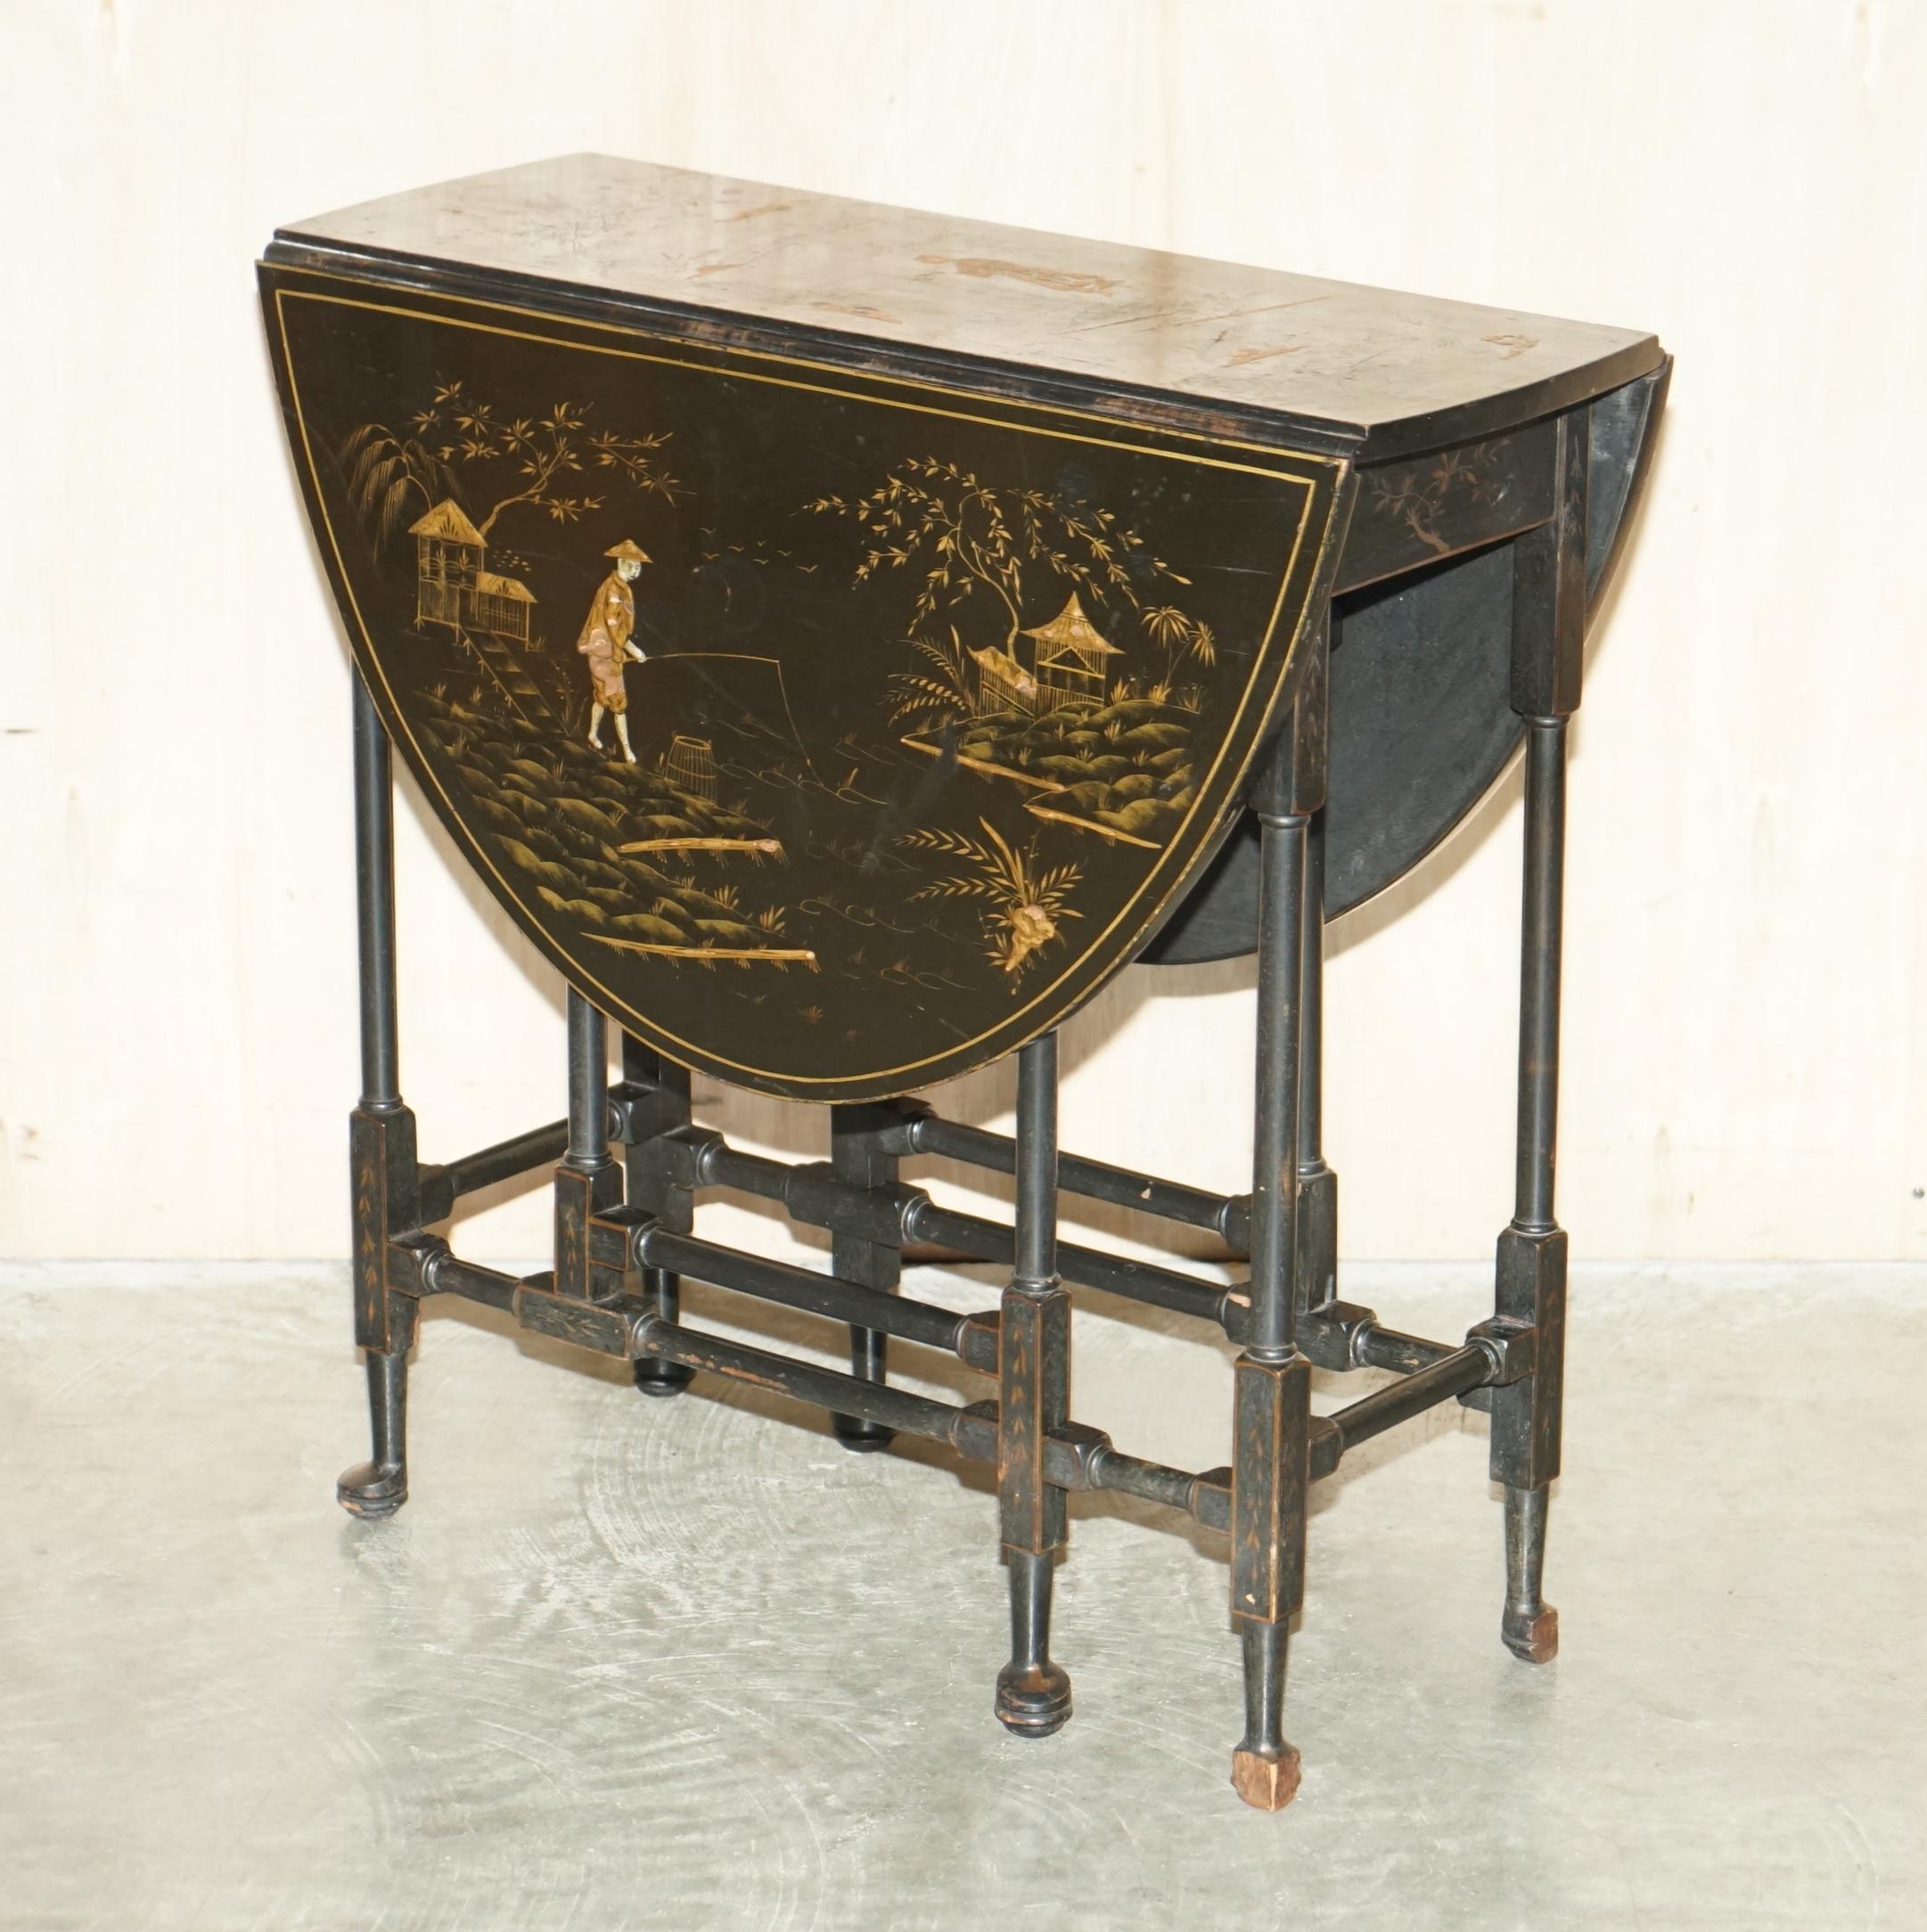 We are delighted to offer for sale this lovely circa 1880-1900 hand made Chinese Chinoiserie Gateleg Sutherland extending table

A very good looking and well made piece, the finish is 100% original and untouched, it looks every bit of its 100-120